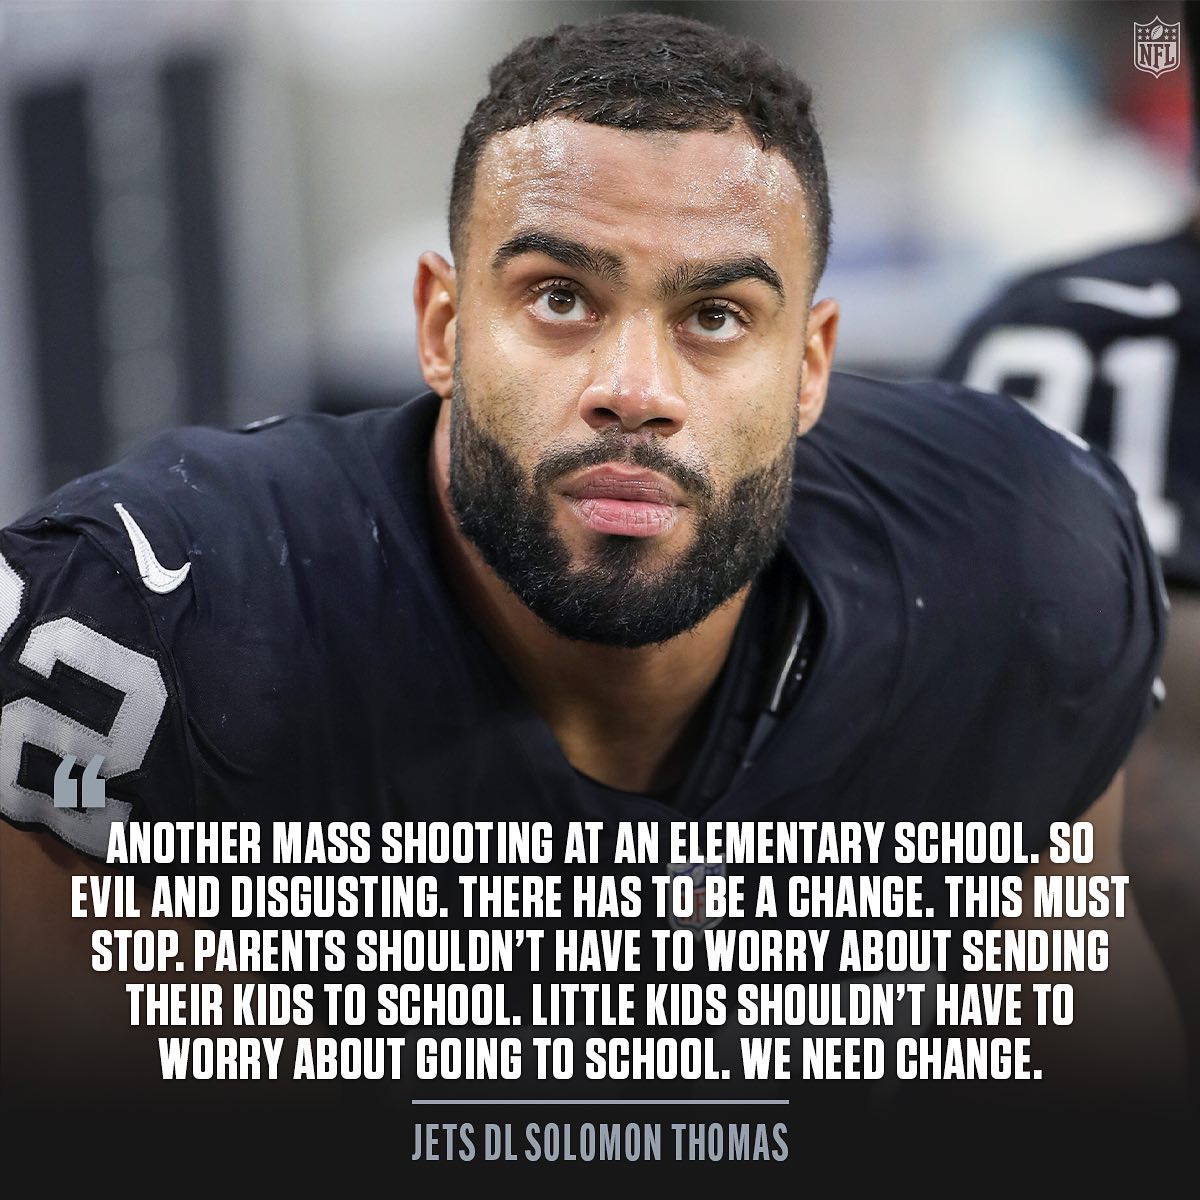 Solomon Thomas demands change in a powerful statement after the horrific school ...